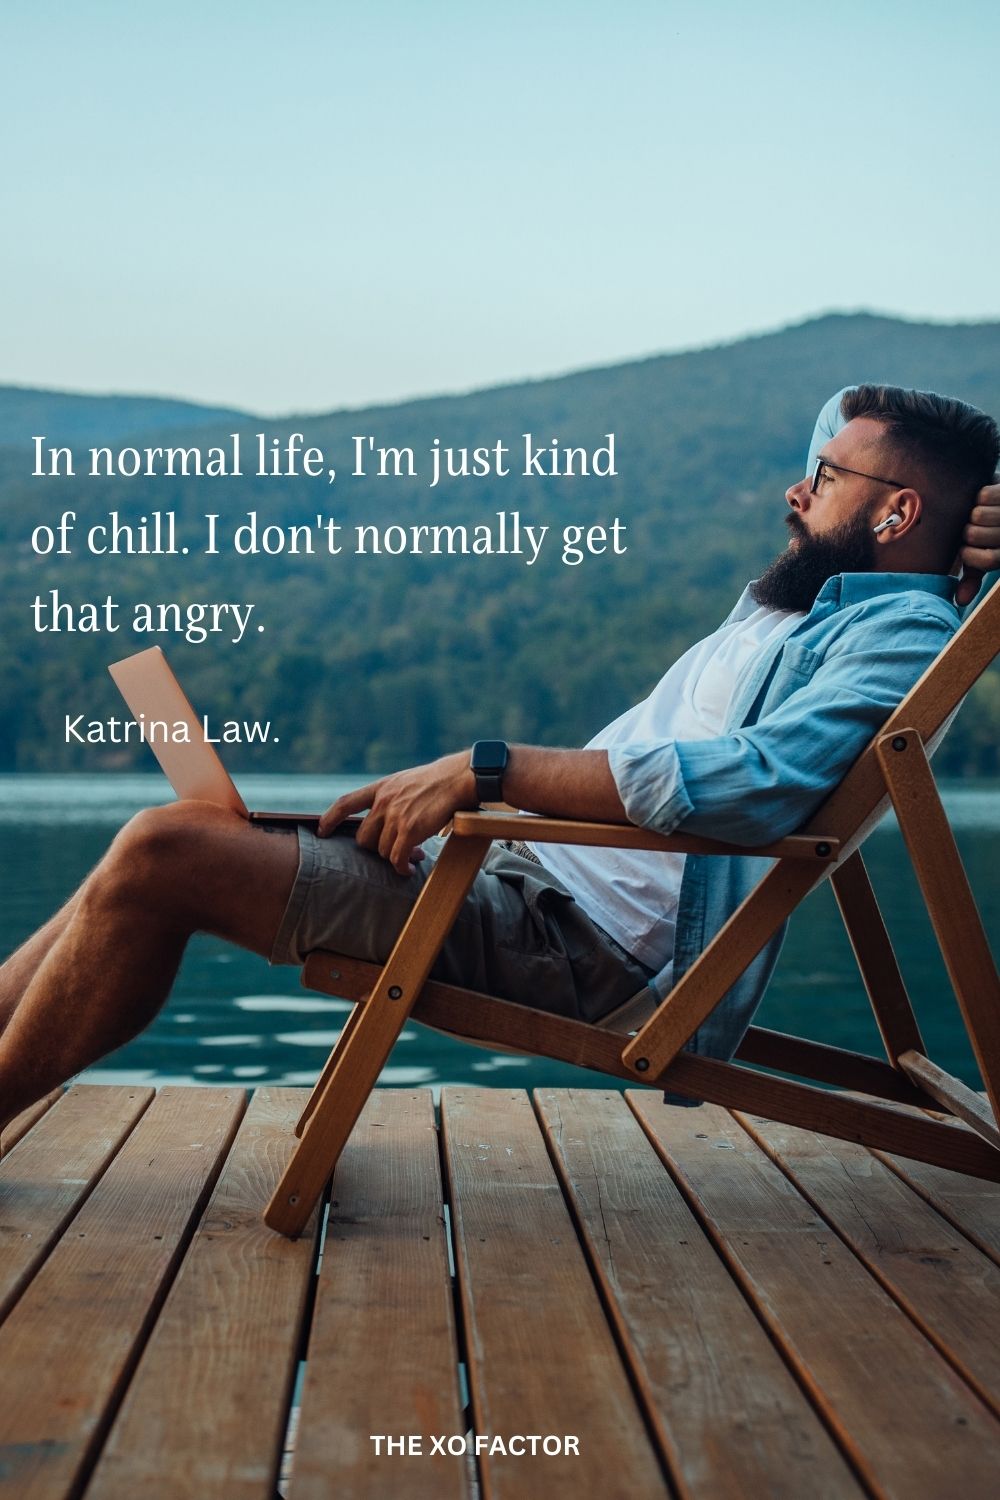 In normal life, I'm just kind of chill. I don't normally get that angry.
Katrina Law.